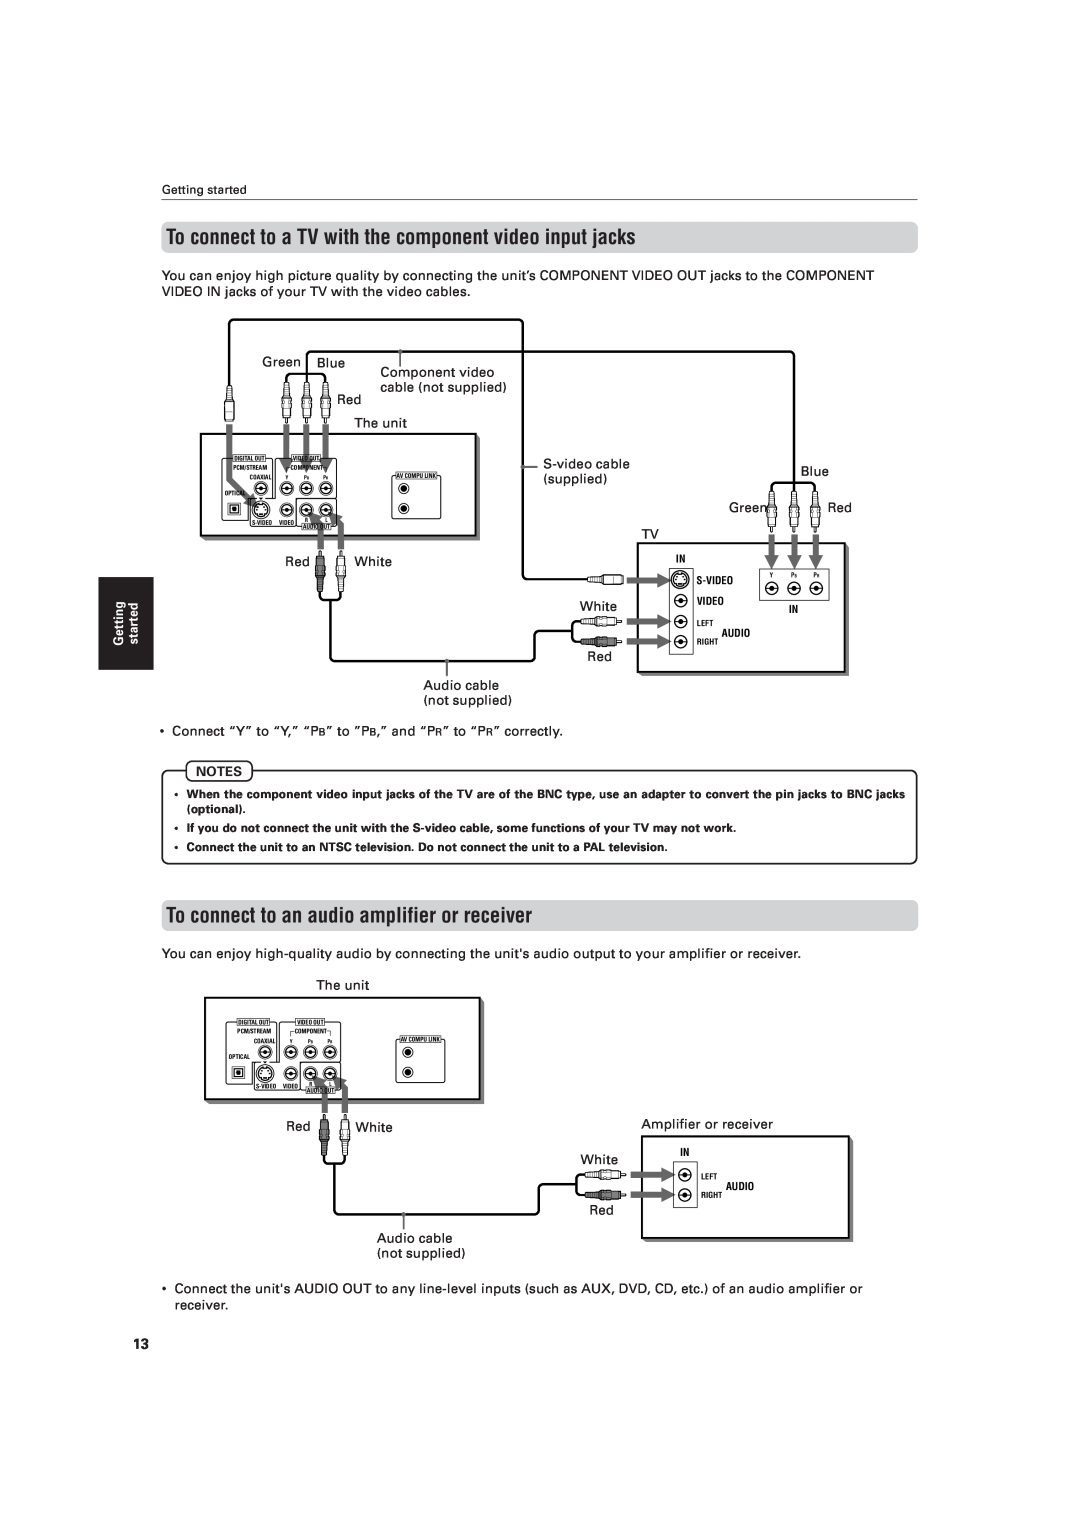 JVC XV-521BK manual To connect to a TV with the component video input jacks, To connect to an audio amplifier or receiver 